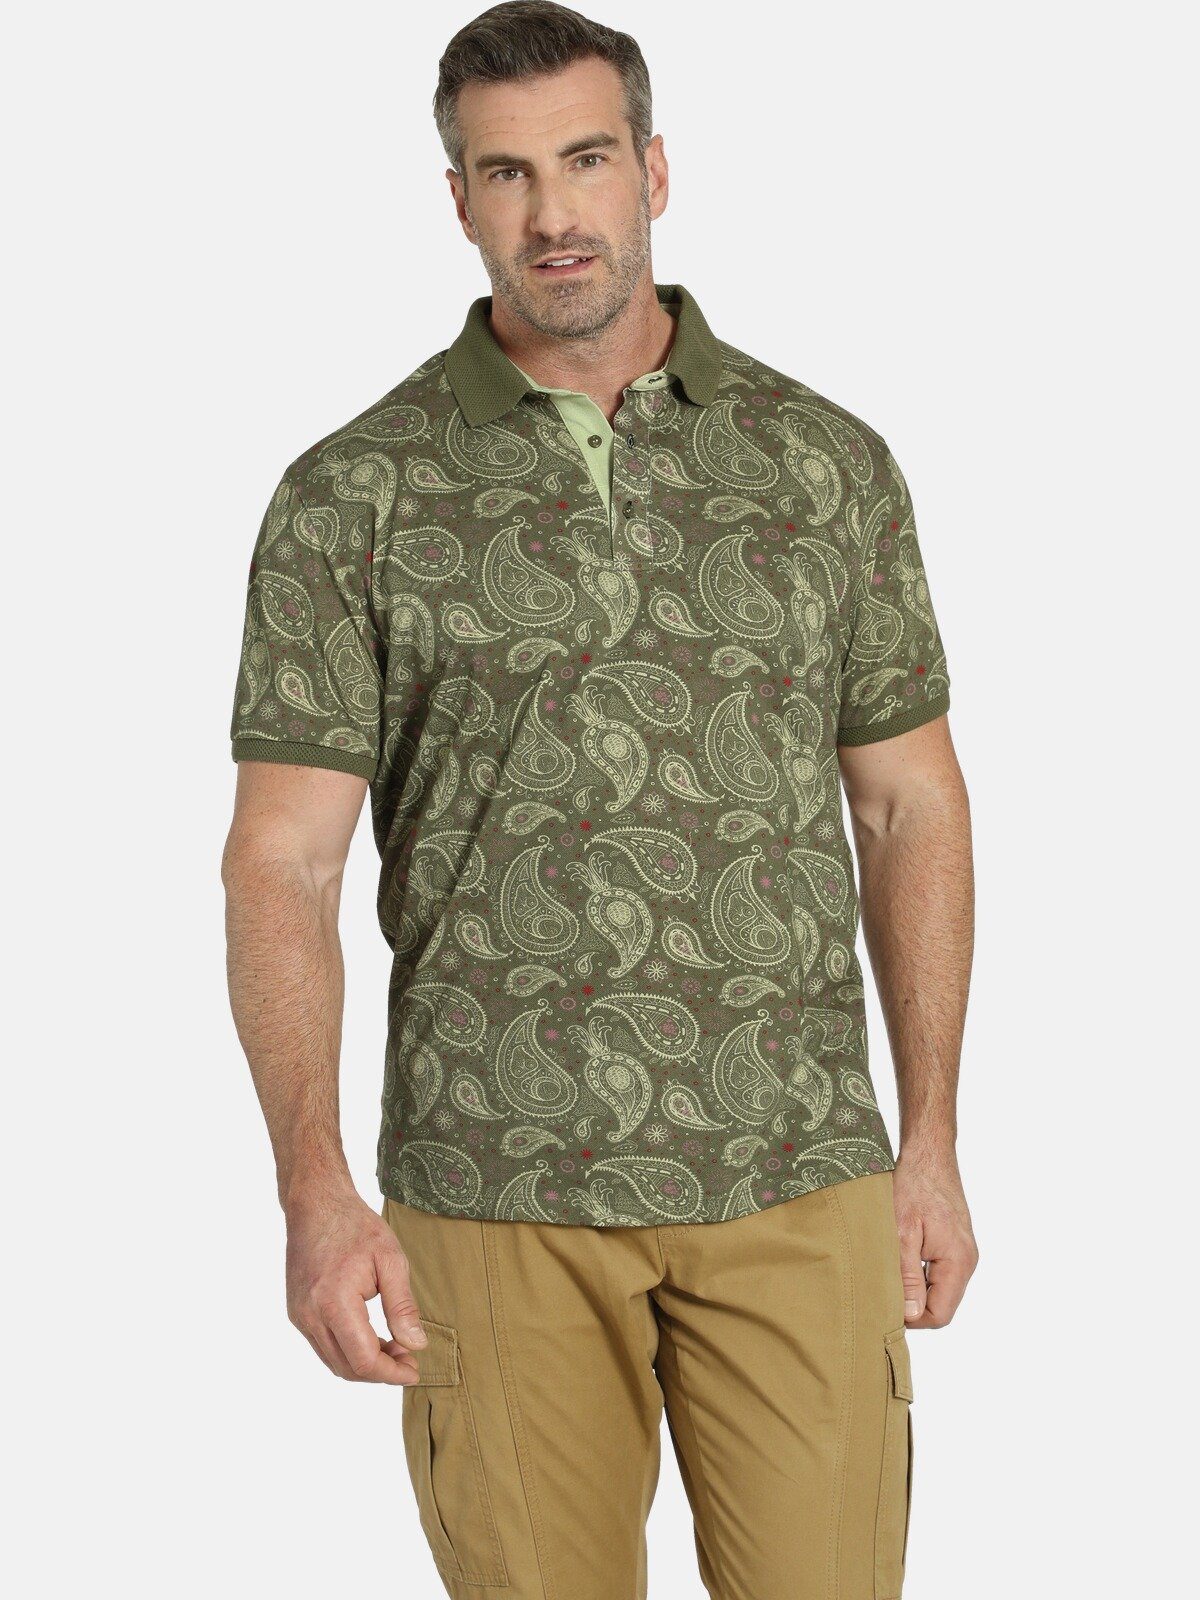 Charles Colby Poloshirt EARL SUITBERT Paisley Muster, Comfort Fit khaki